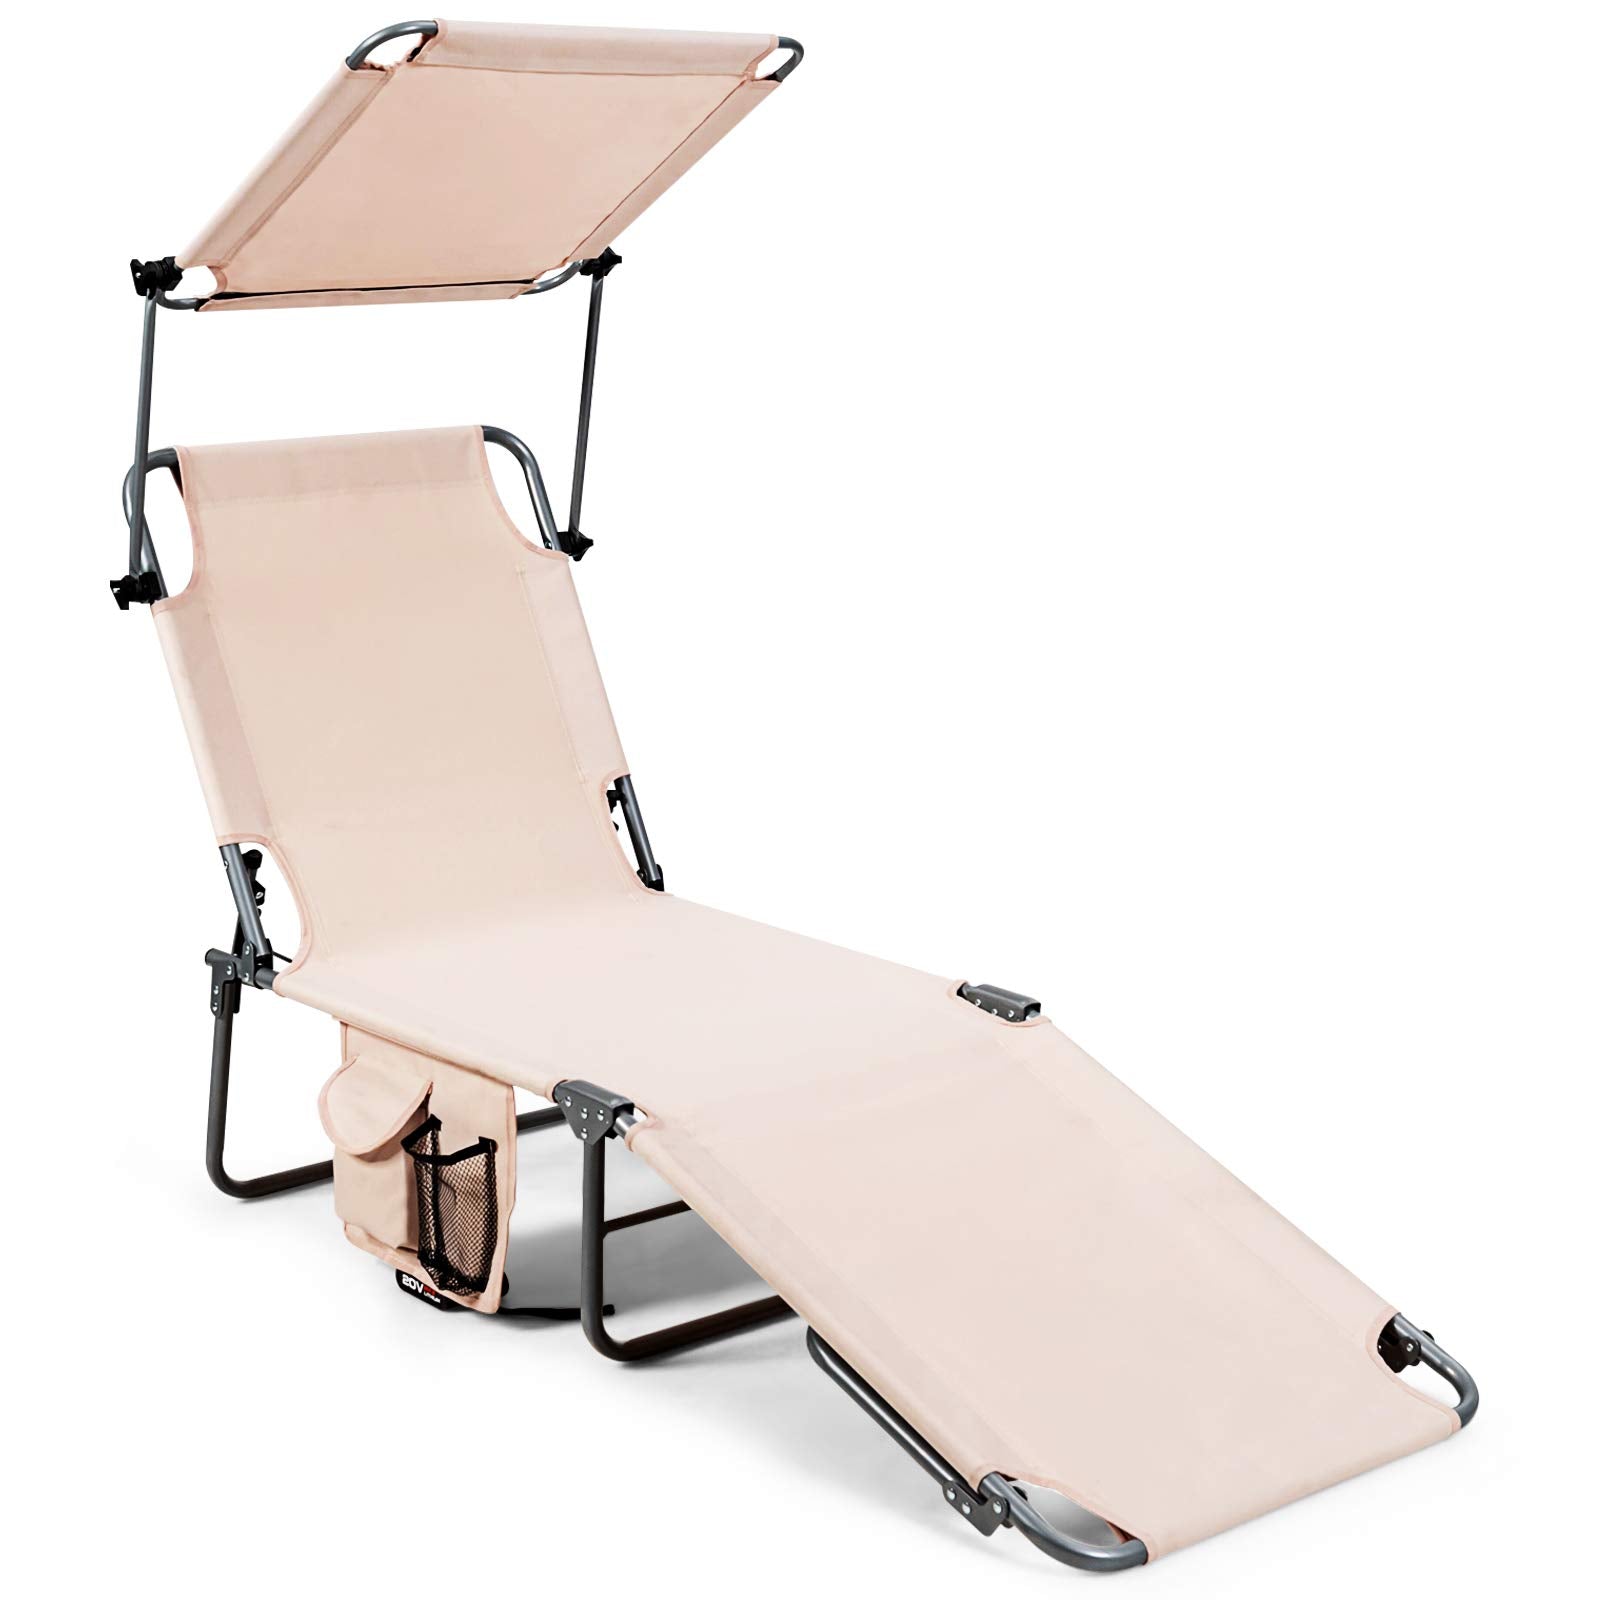 Giantex Lounge Chaise Chair Position and Shade Adjustable W/Canopy and Storage Pocket